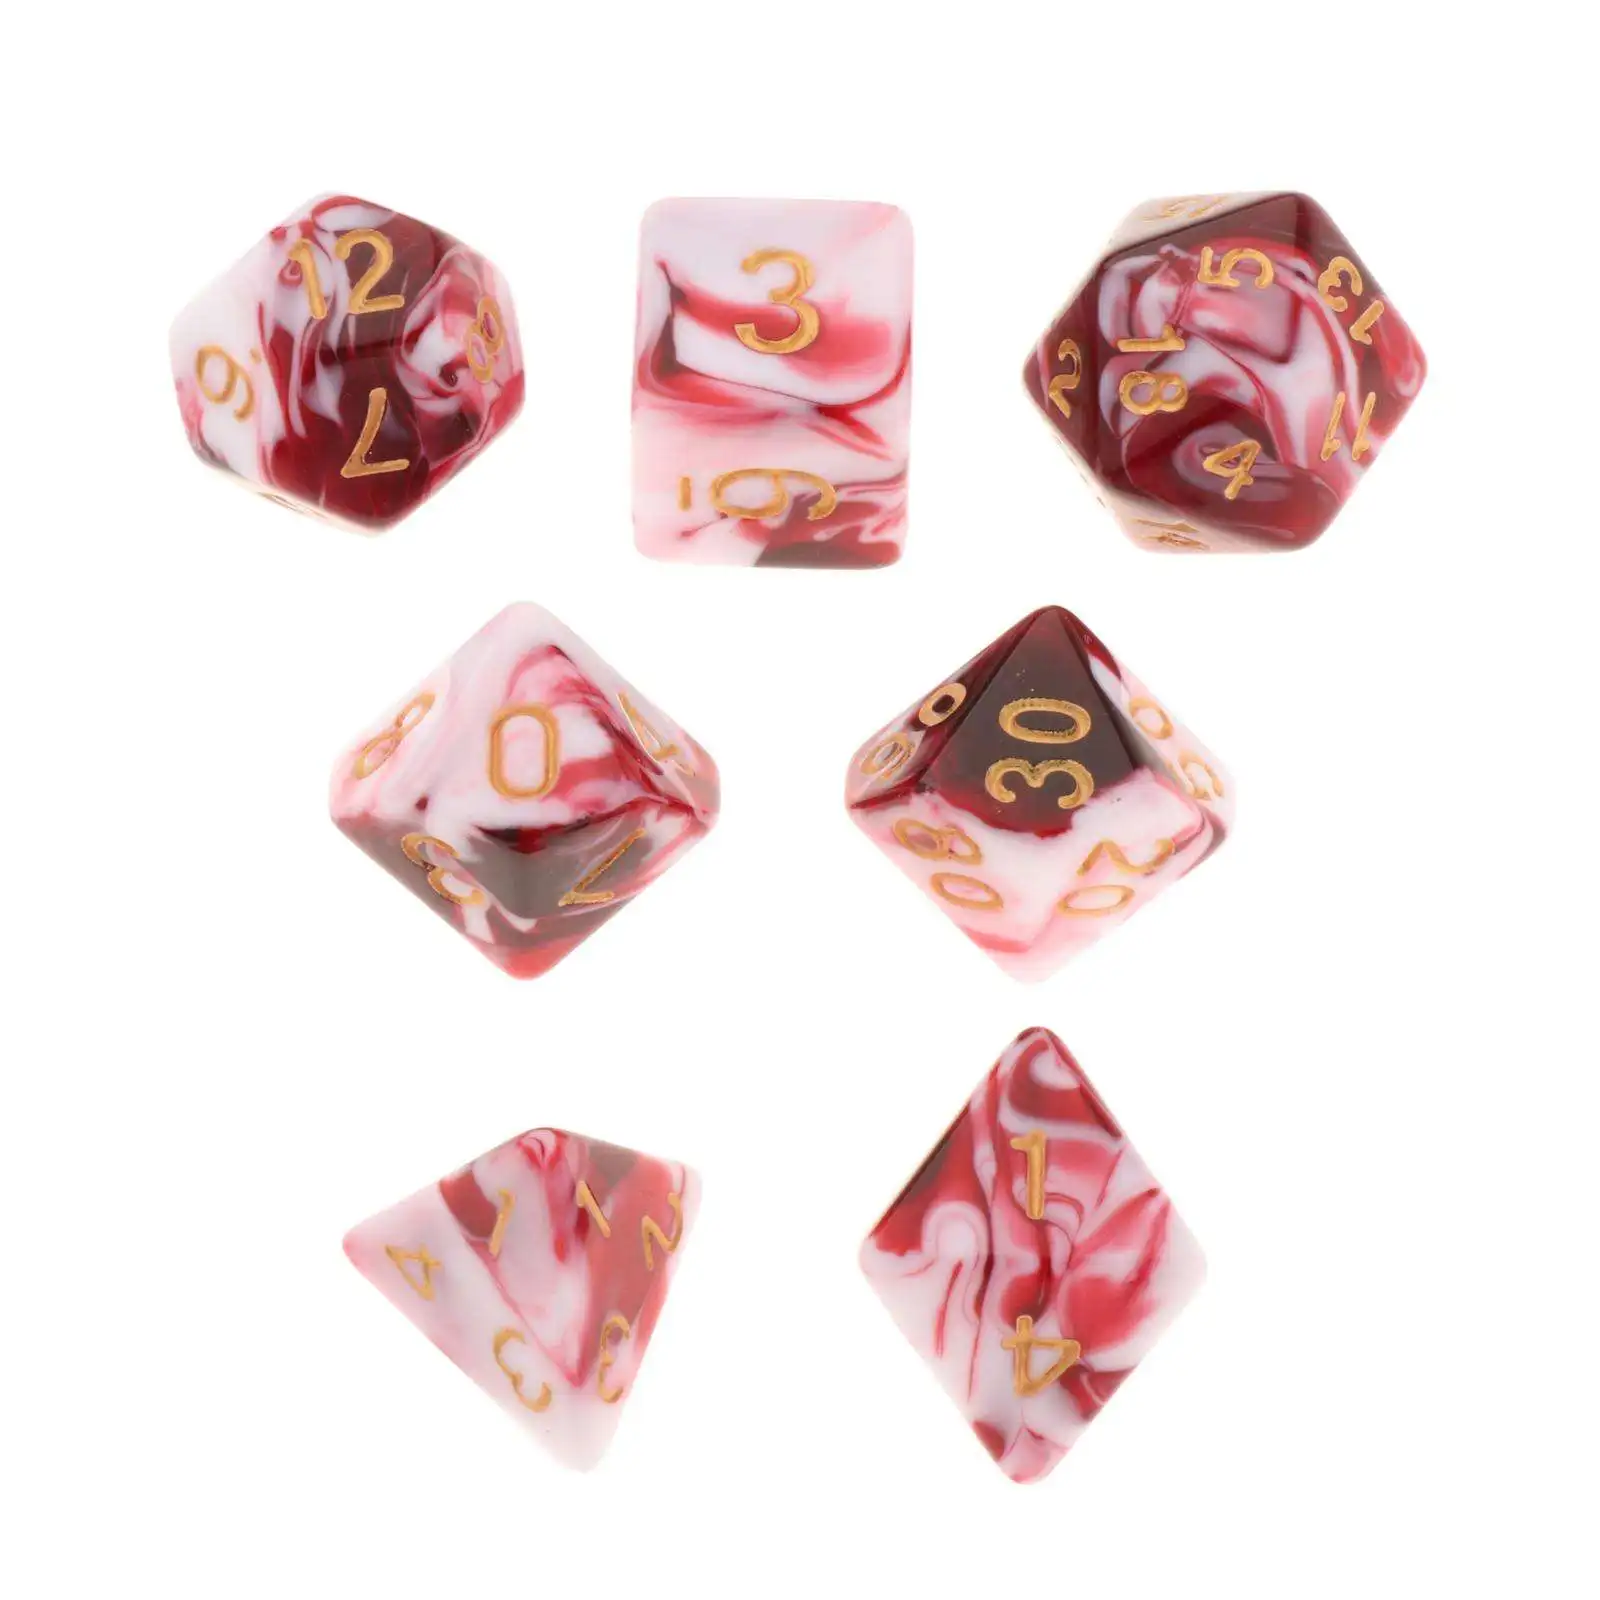 7 Pieces Polyhedral Dice Party Favors Casino Accessories Party Supply Rpg Dices Irregular Role Playing Dice for Dnd Rpg Mtg